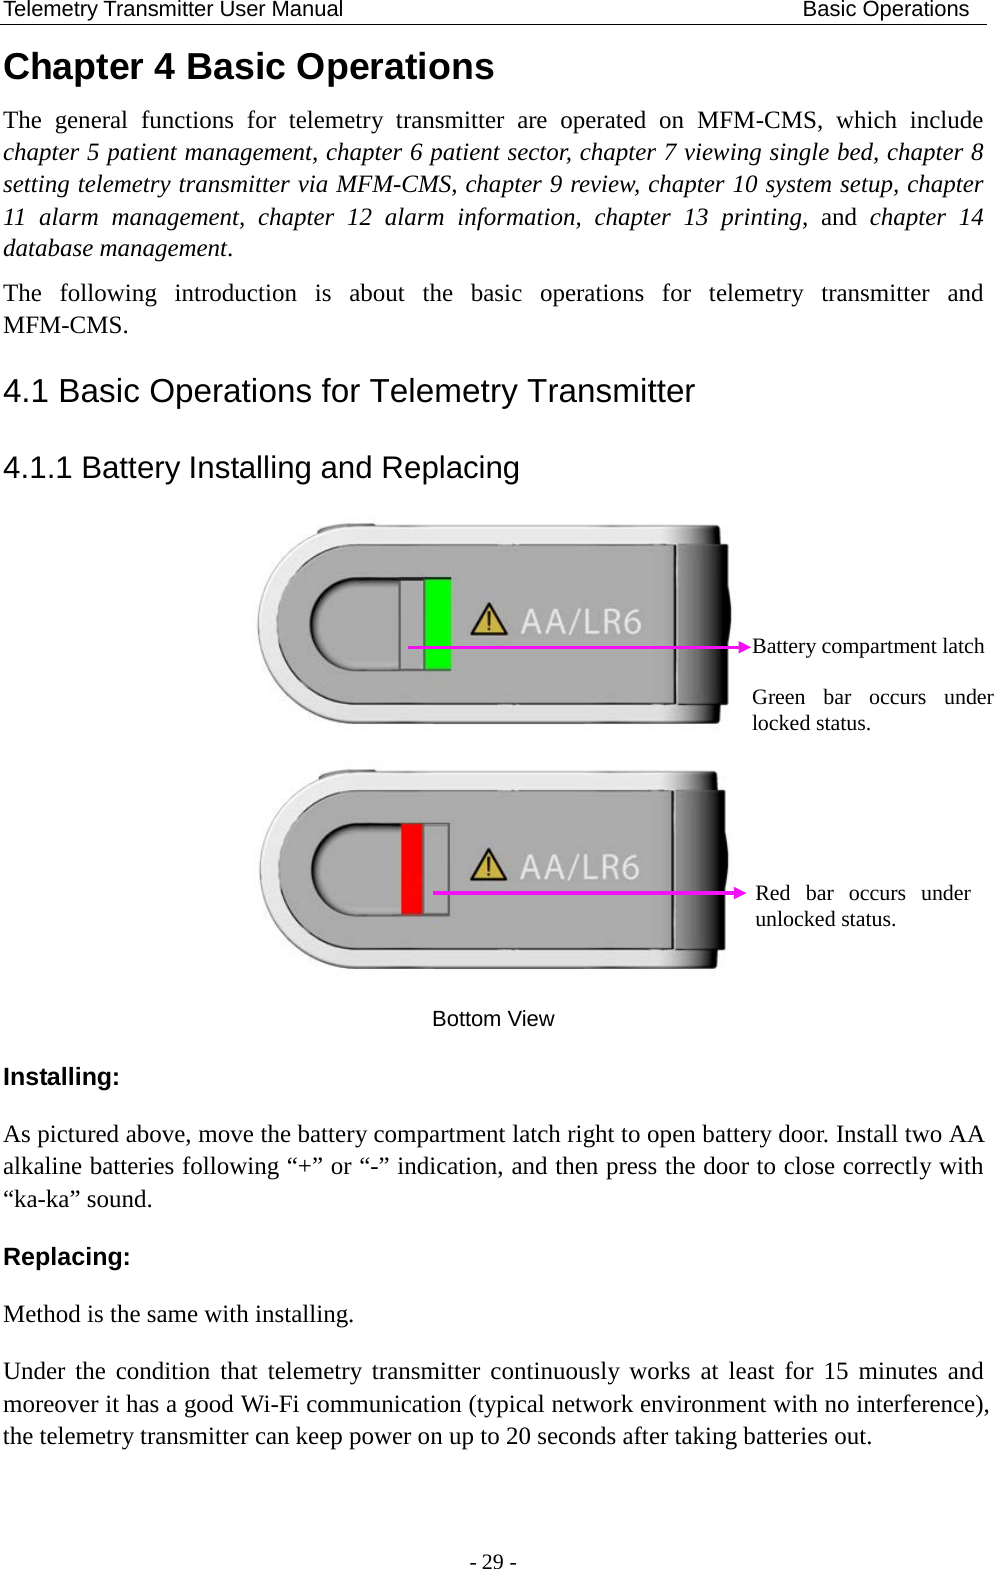 Telemetry Transmitter User Manual                                          Basic Operations Chapter 4 Basic Operations The  general functions for telemetry transmitter are operated on MFM-CMS,  which include chapter 5 patient management, chapter 6 patient sector, chapter 7 viewing single bed, chapter 8 setting telemetry transmitter via MFM-CMS, chapter 9 review, chapter 10 system setup, chapter 11  alarm management, chapter 12 alarm information, chapter 13 printing, and chapter 14 database management. The following introduction is about the basic operations for telemetry transmitter and MFM-CMS. 4.1 Basic Operations for Telemetry Transmitter 4.1.1 Battery Installing and Replacing   Bottom View Installing: As pictured above, move the battery compartment latch right to open battery door. Install two AA alkaline batteries following “+” or “-” indication, and then press the door to close correctly with “ka-ka” sound.   Replacing: Method is the same with installing. Under the condition that telemetry transmitter continuously works at least for  15  minutes and moreover it has a good Wi-Fi communication (typical network environment with no interference), the telemetry transmitter can keep power on up to 20 seconds after taking batteries out.  Battery compartment latch  Green bar occurs under locked status. Red bar occurs under unlocked status.  - 29 - 